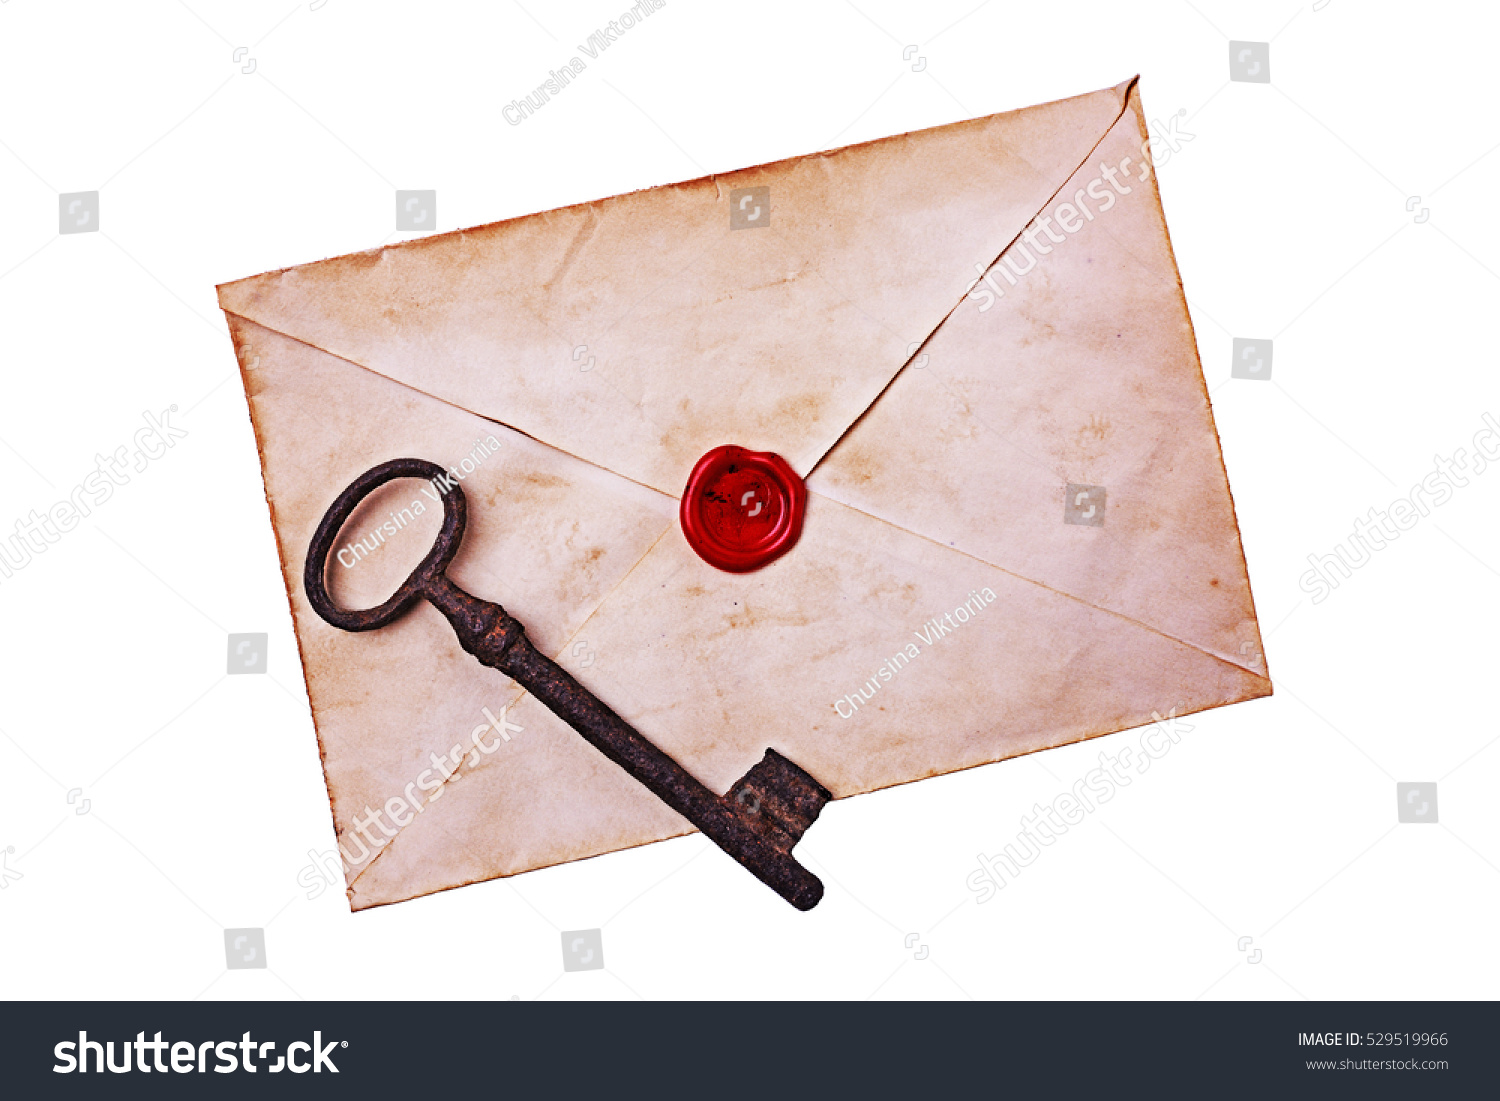 Old envelope with red wax and rusty key isolated on white background. #529519966